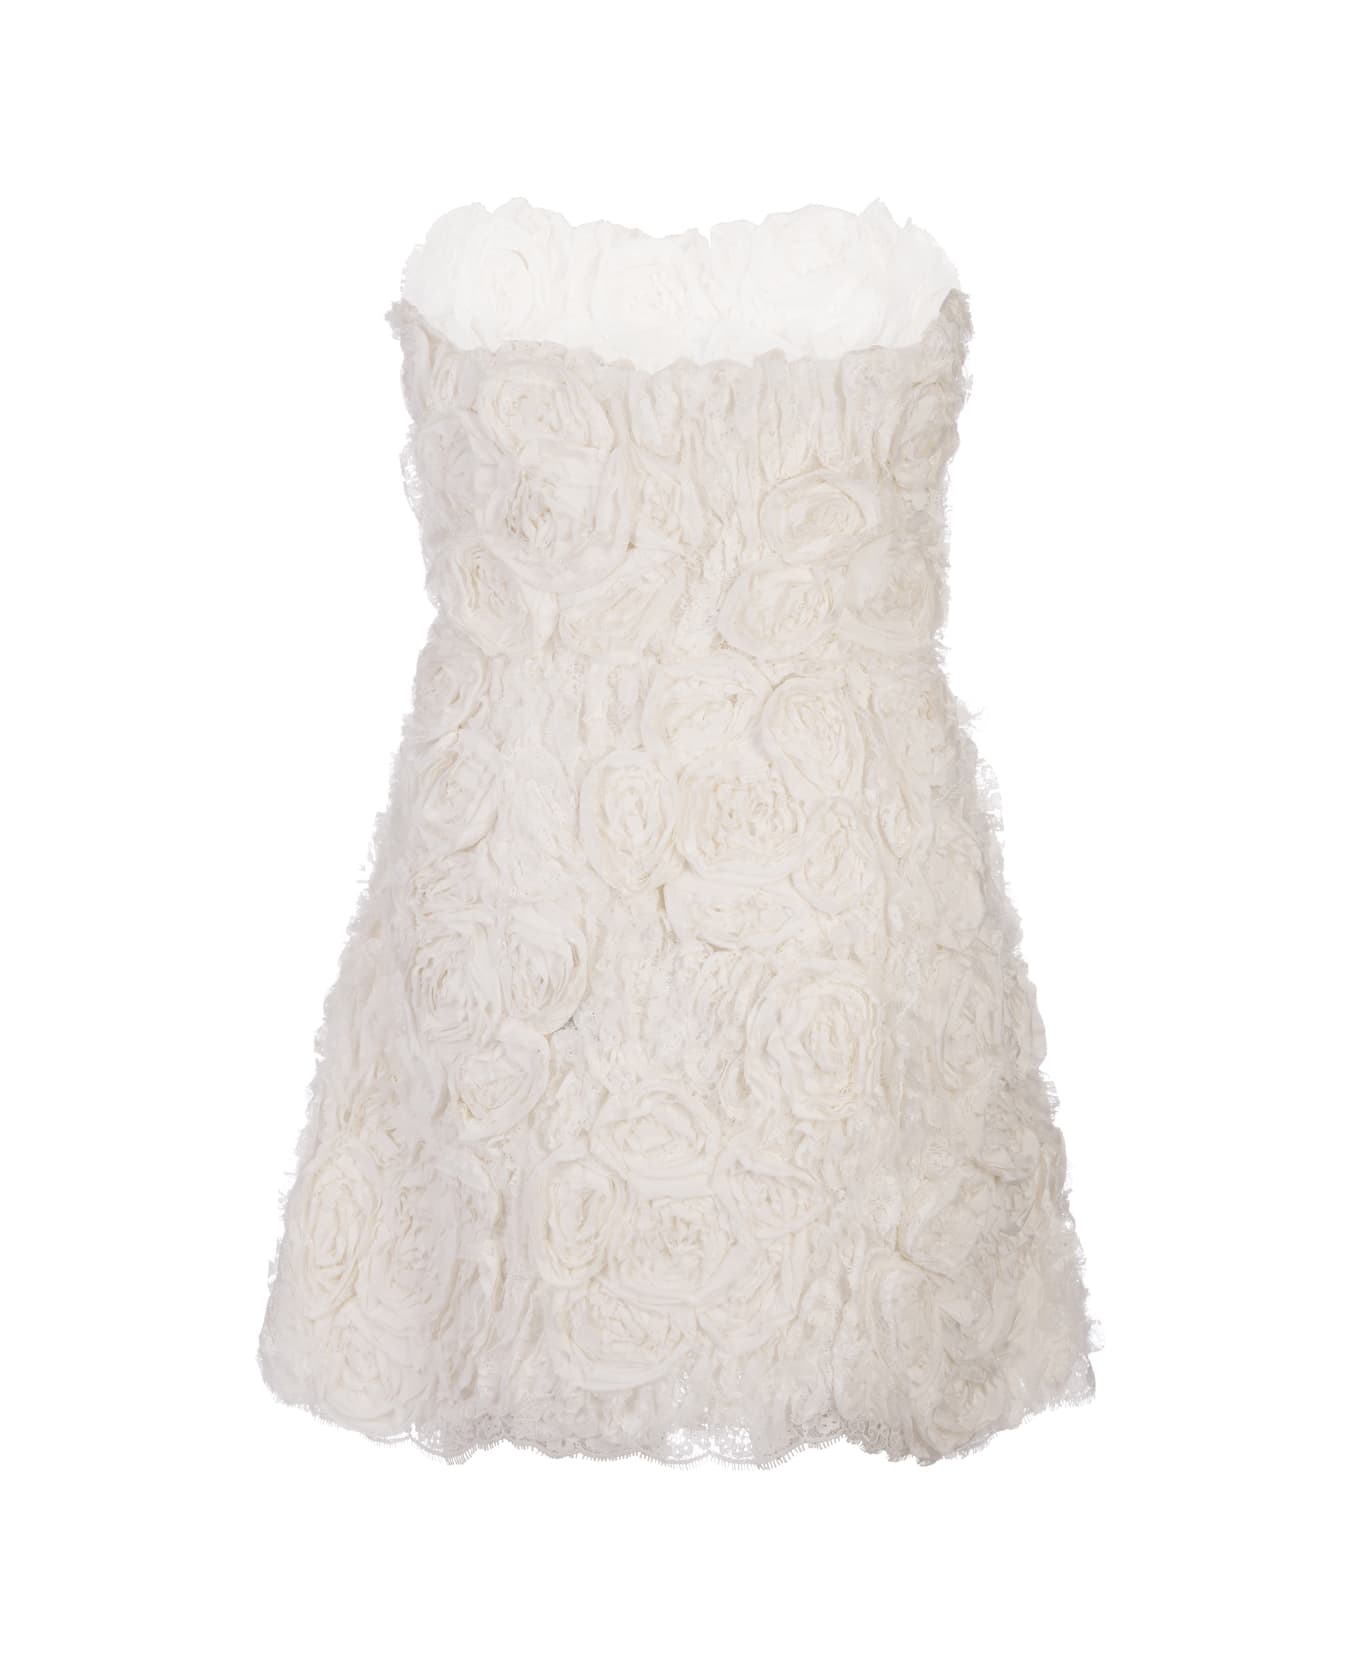 Ermanno Scervino Sculpture Dress In White Lace With Applied Roses - White ワンピース＆ドレス